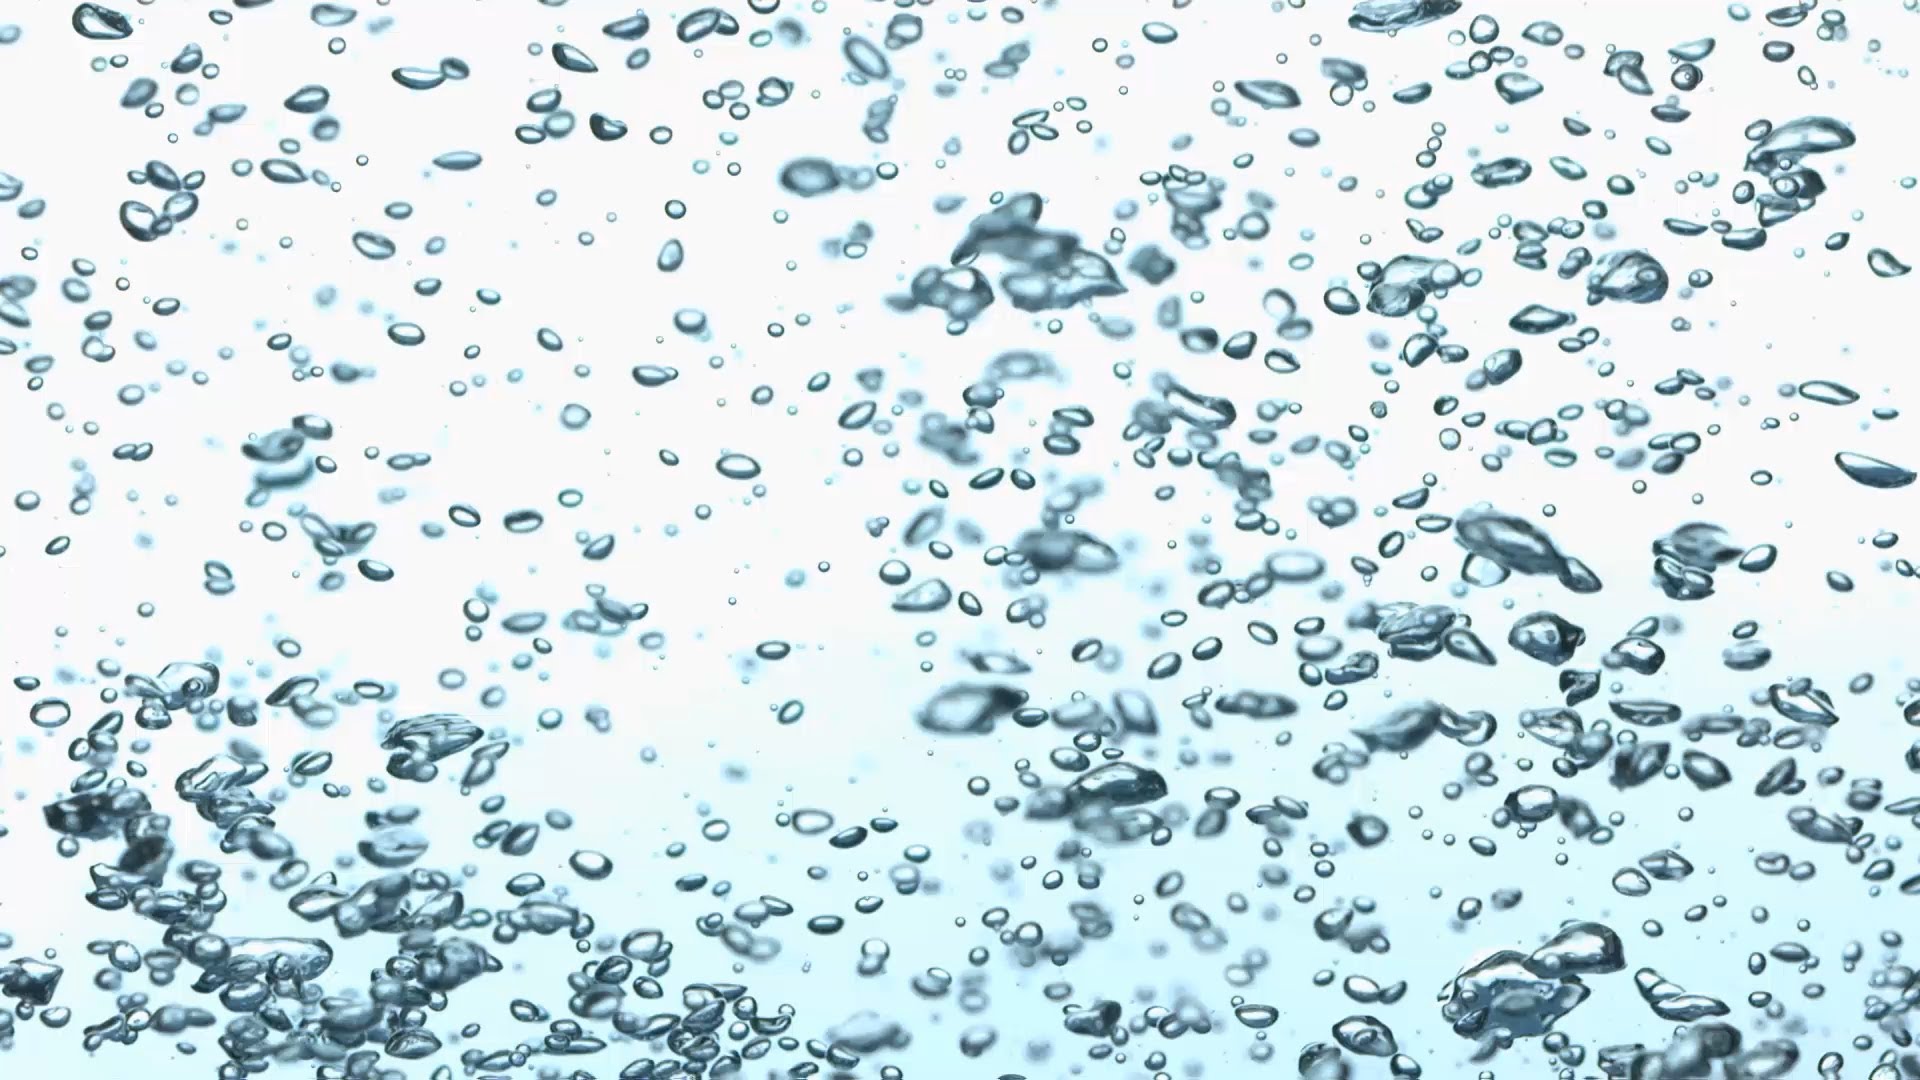 Free Slow Motion Footage: Slow Motion Bubbles - YouTube